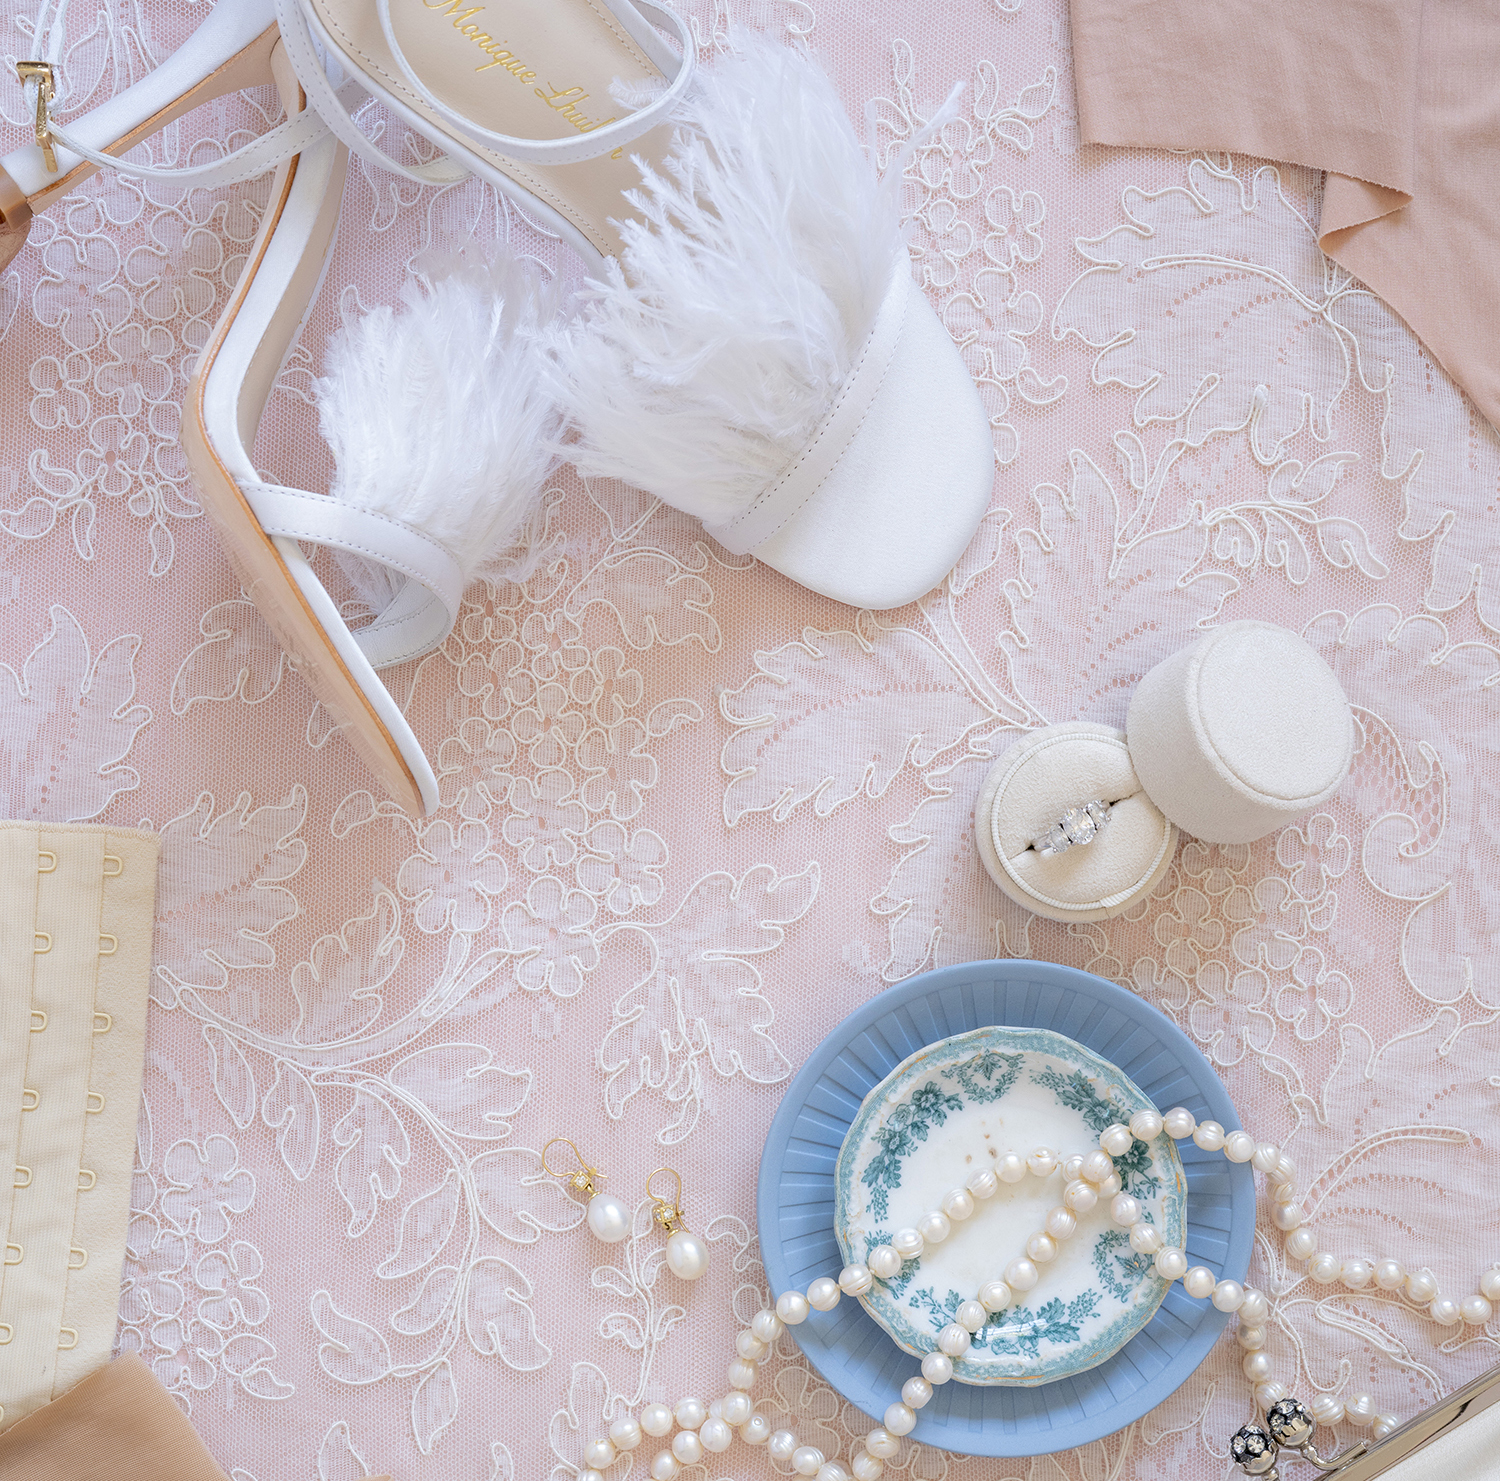 Everything You Need to Take to Your Final Wedding Dress Fitting